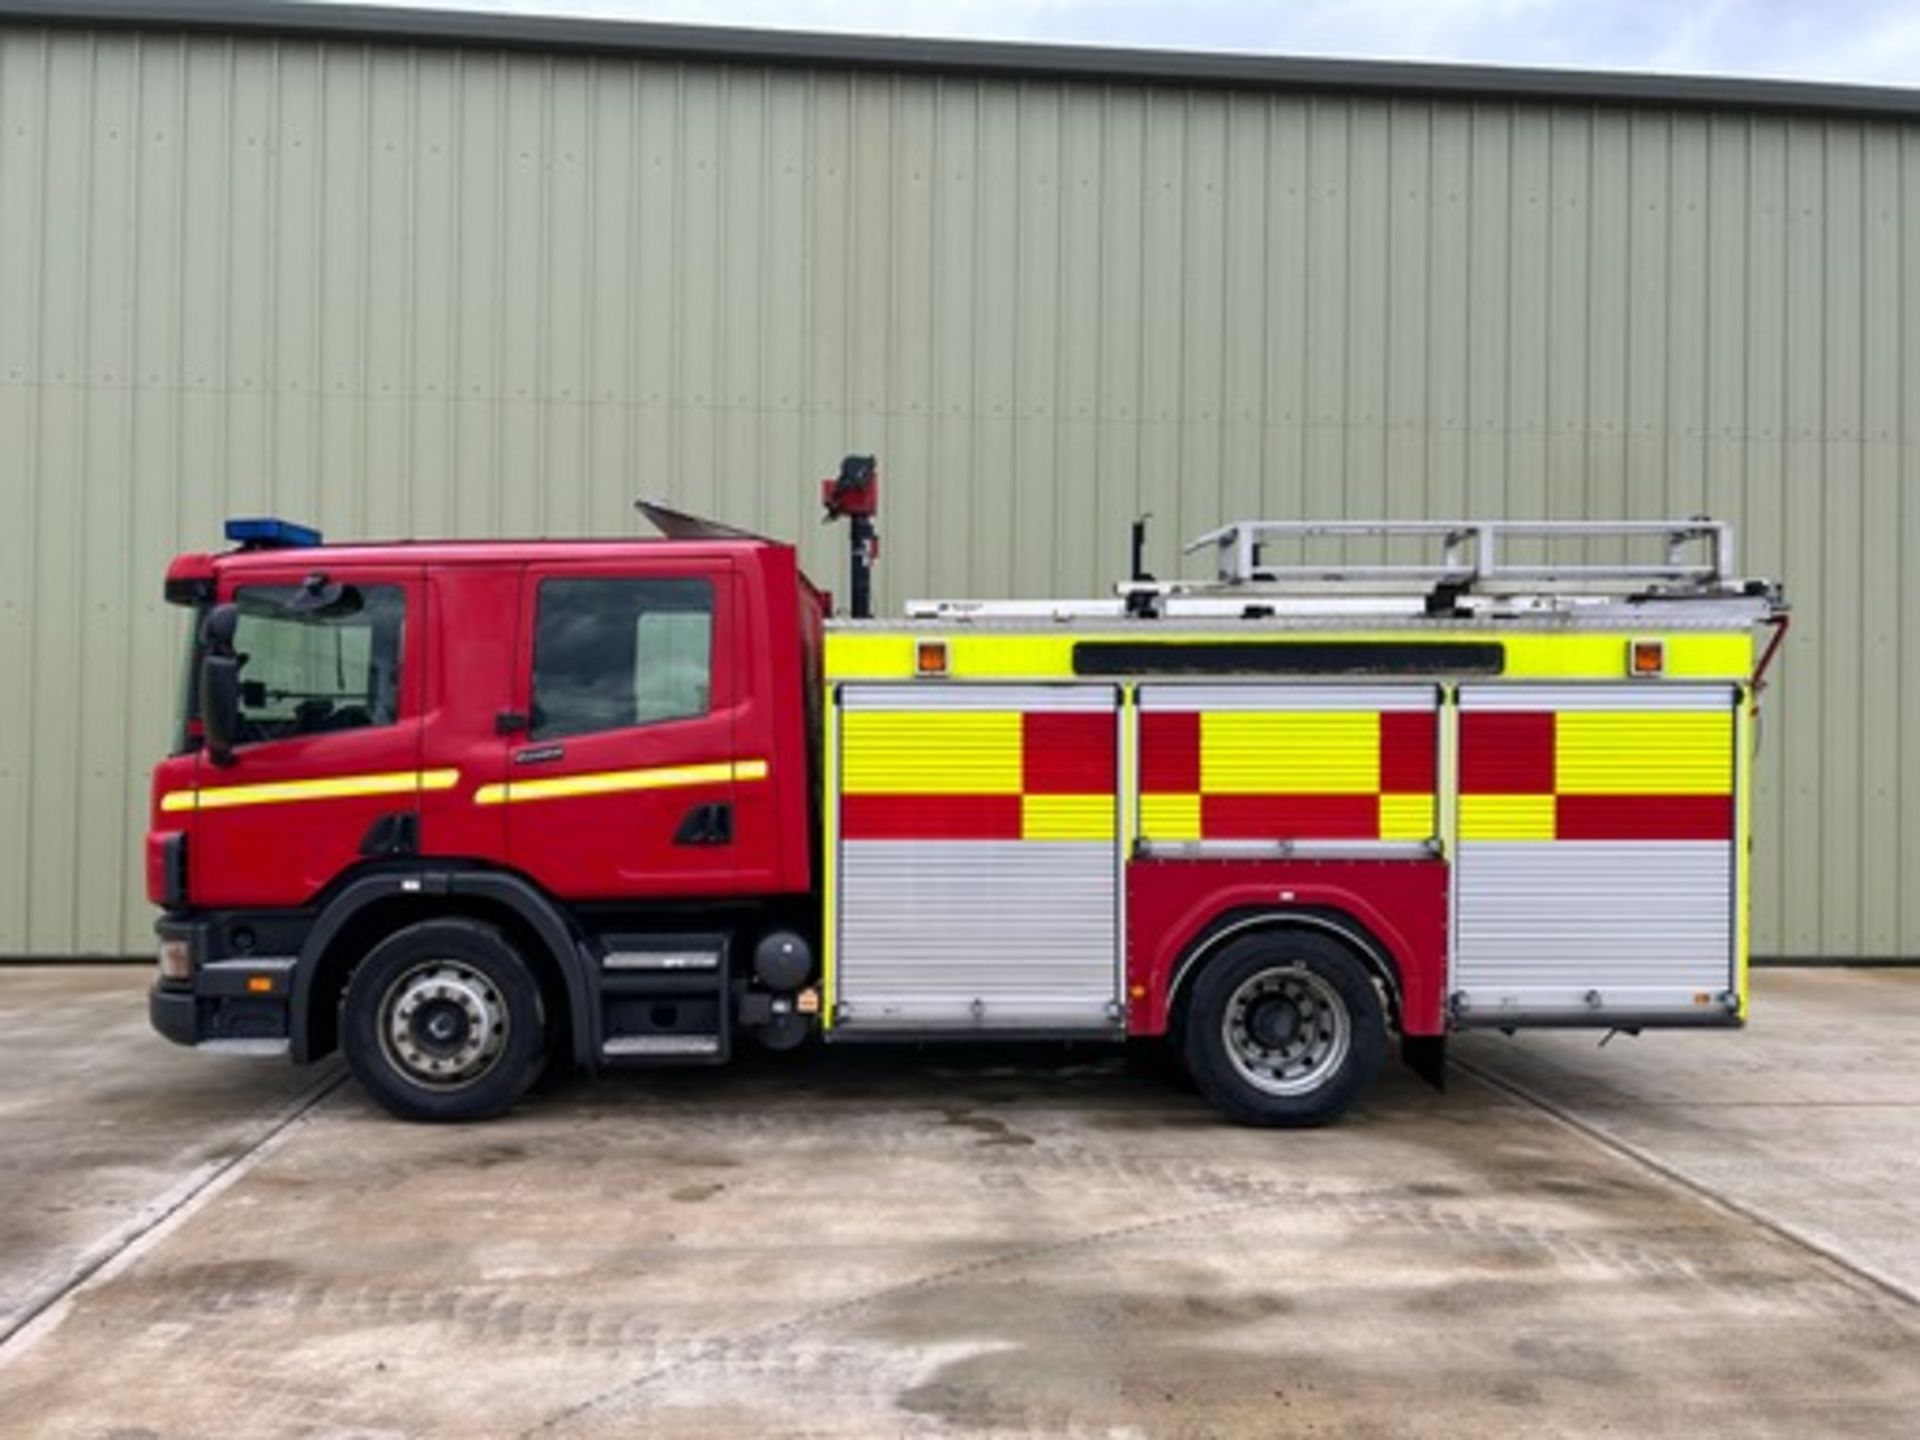 Scania Excalibur 94D 260 Fire Appliance - Image 7 of 26